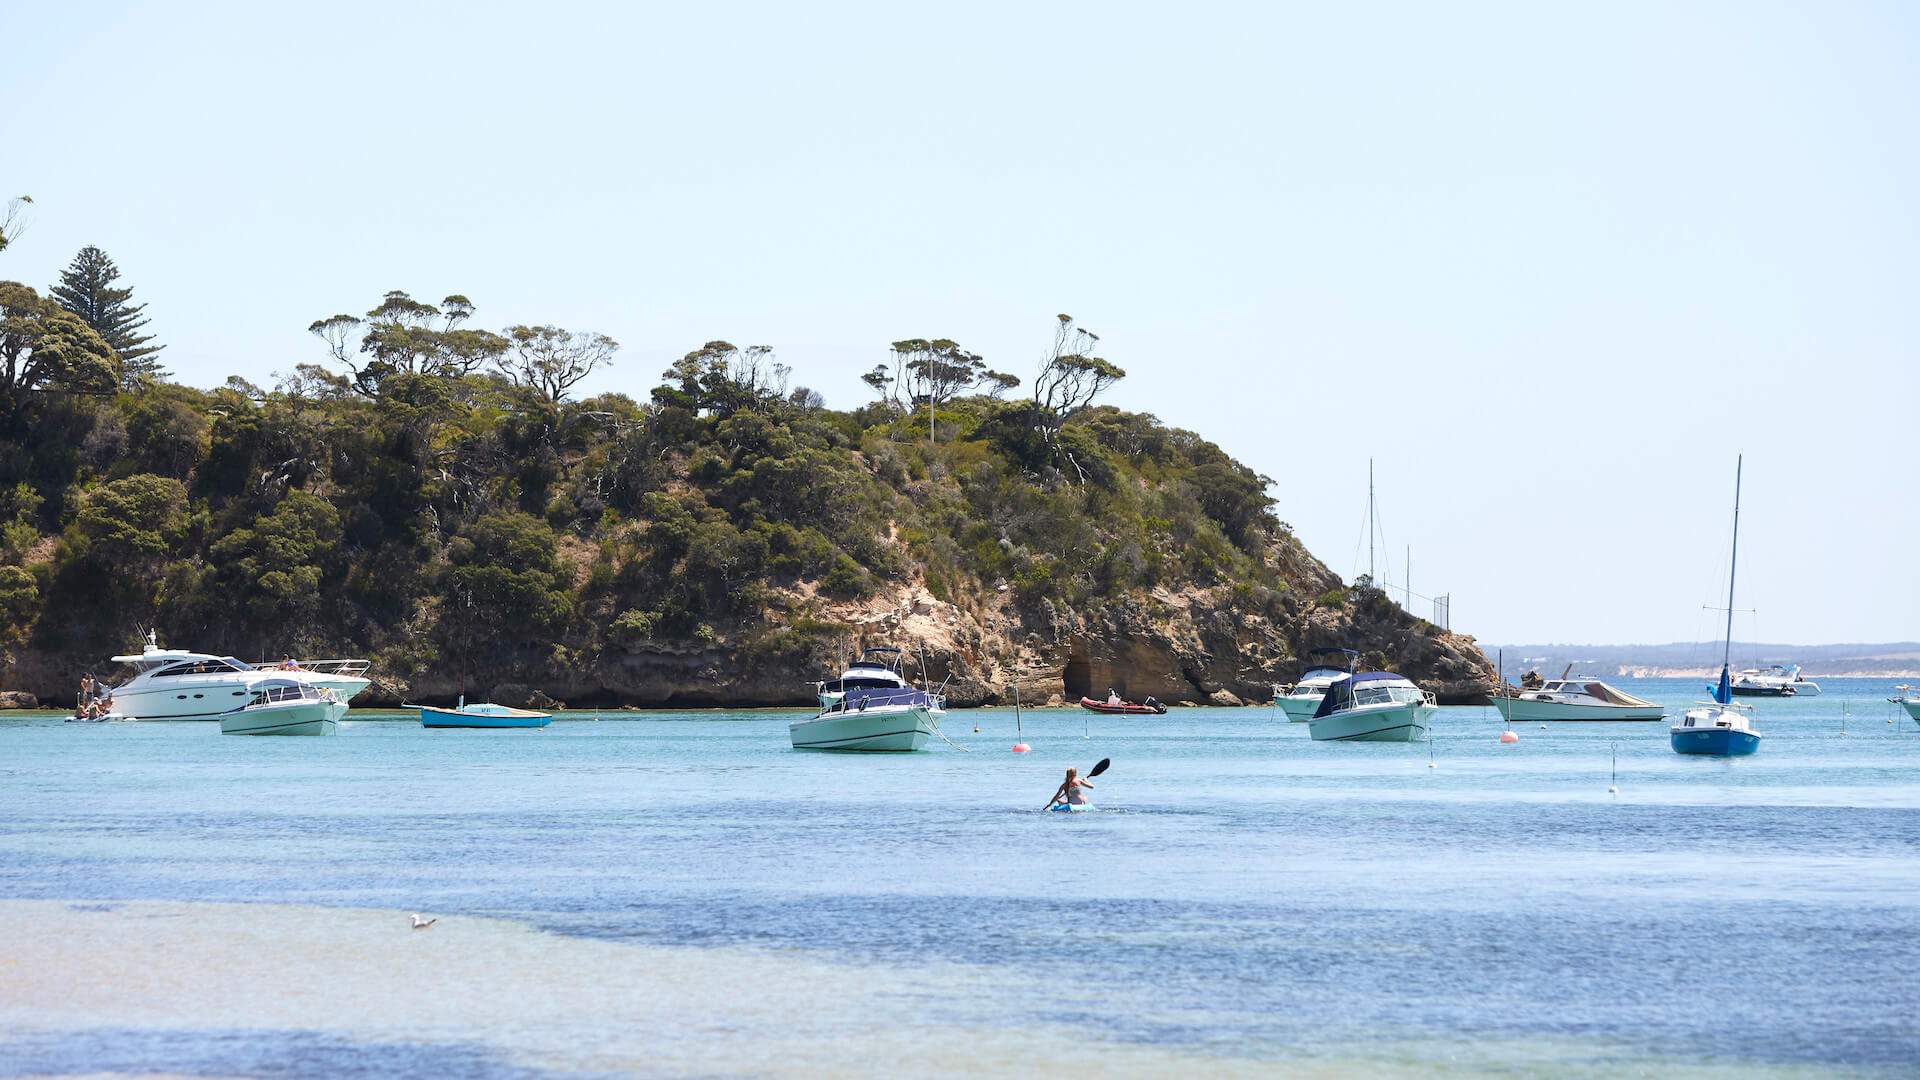 Kayaking at Mornington Peninsula - one of the best places to kayak and canoe near Melbourne